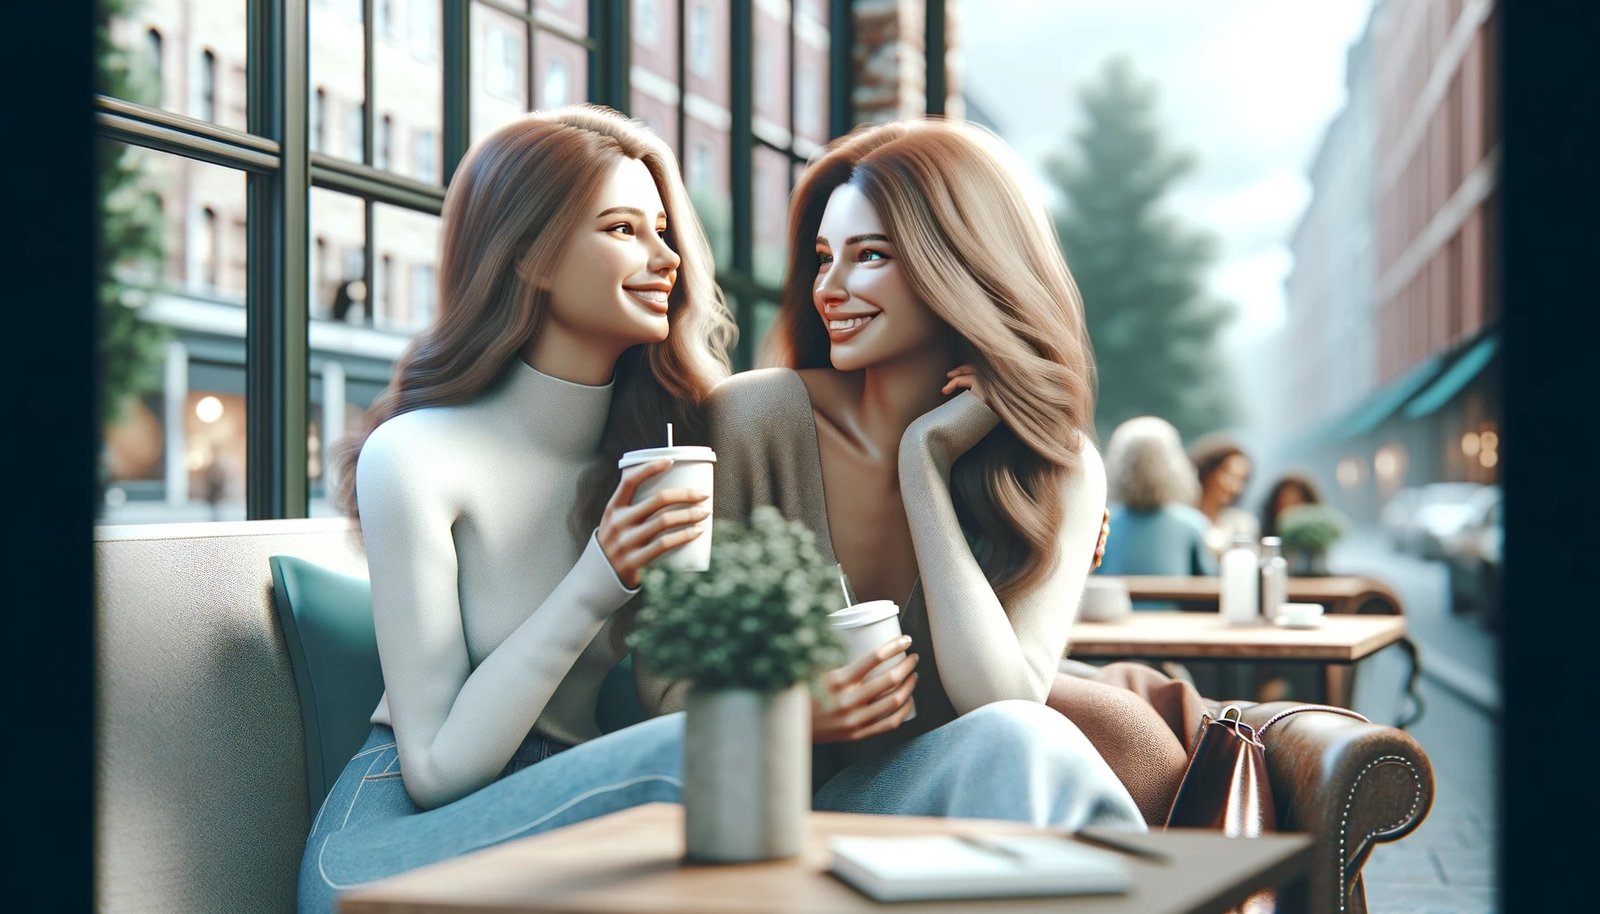 Two female friends enjoying drinks and conversation at an outdoor cafe.